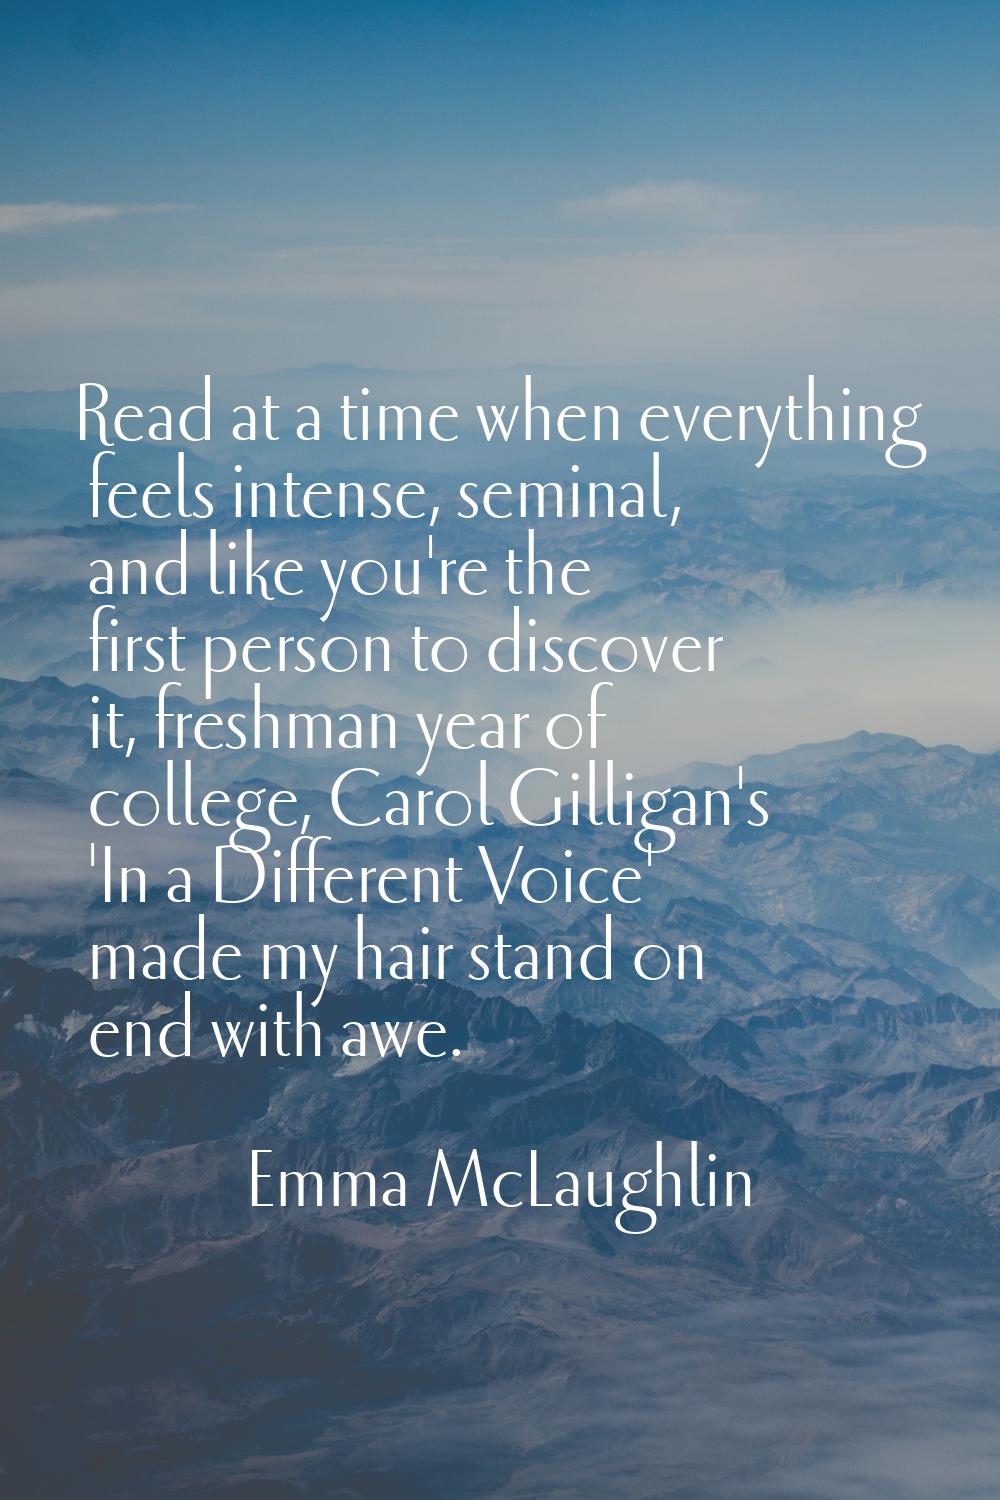 Read at a time when everything feels intense, seminal, and like you're the first person to discover